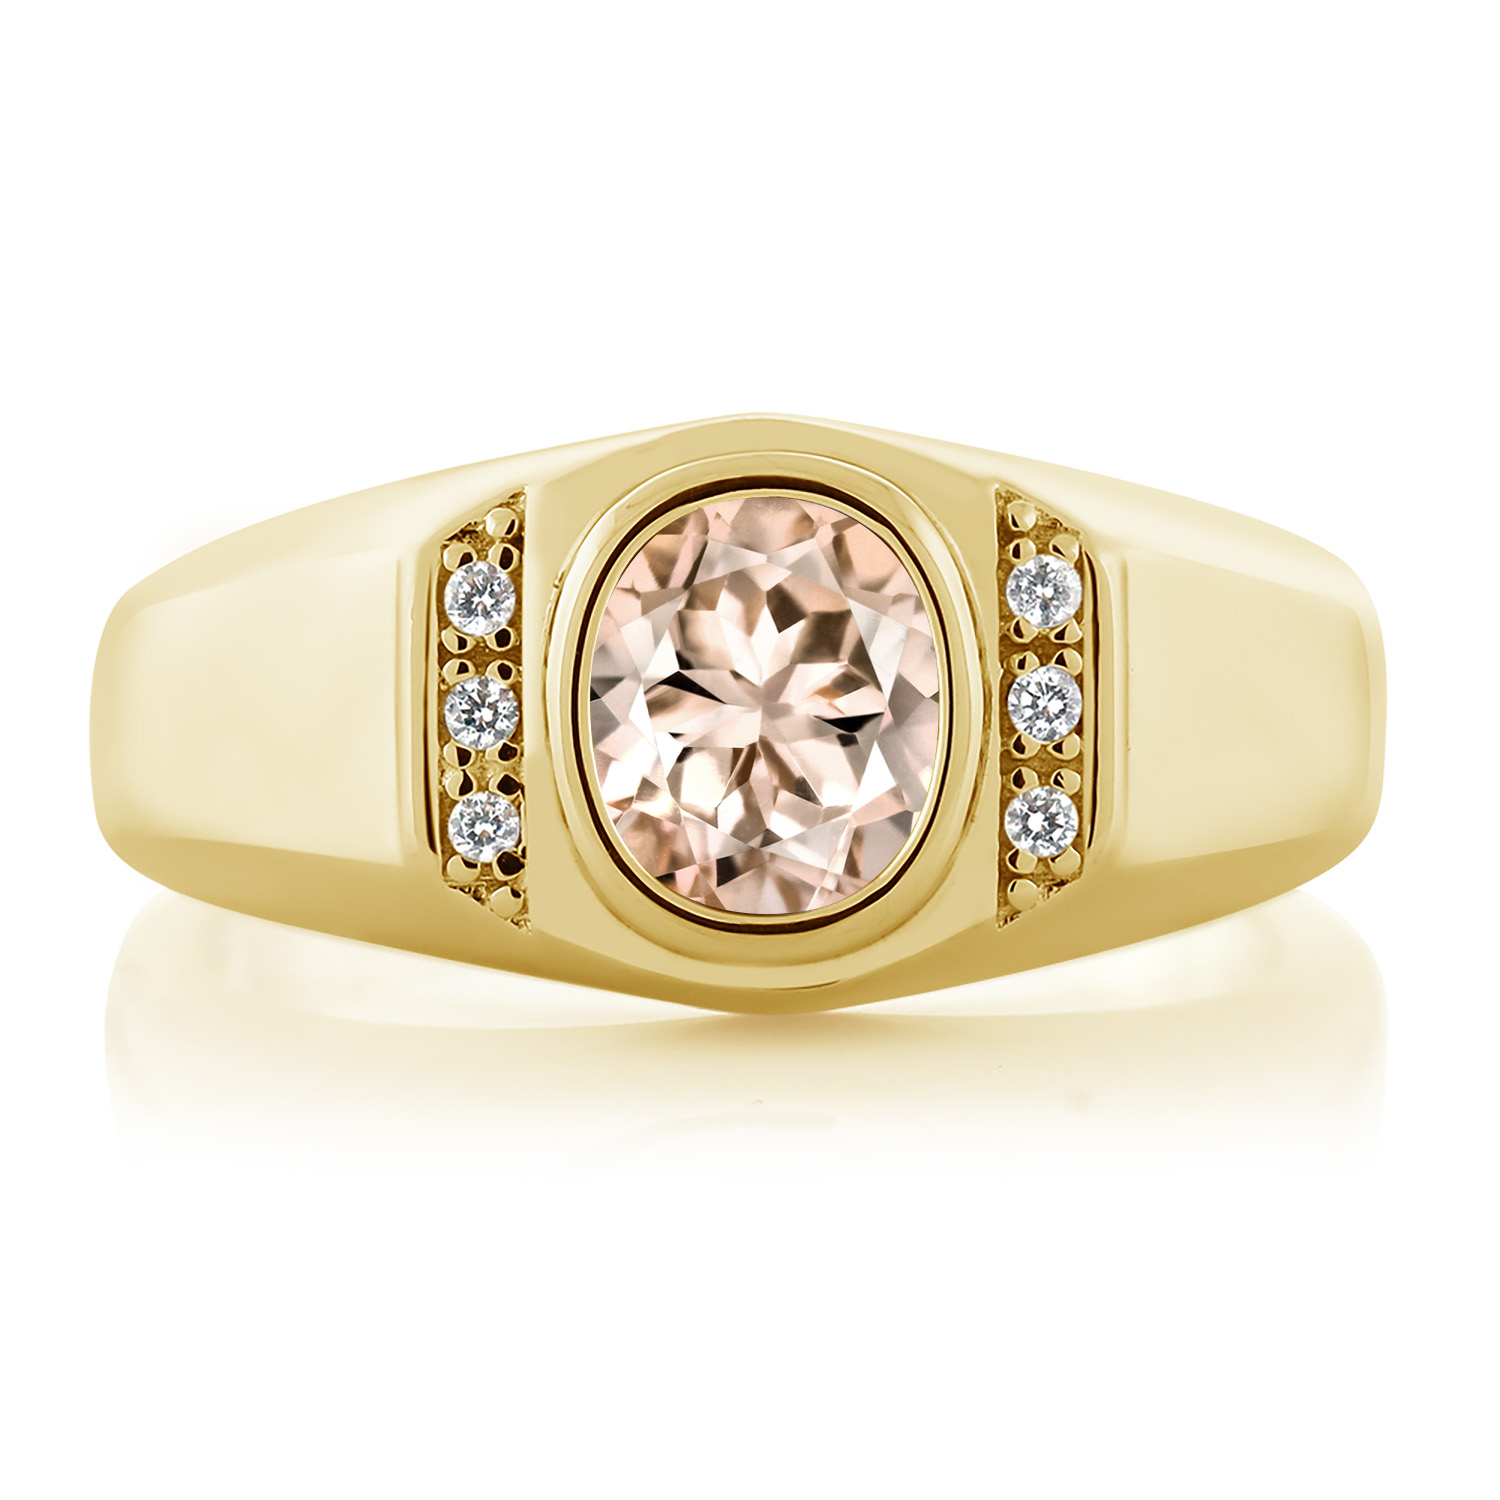 Gem Stone King 1.06 Ct Peach Morganite White Created Sapphire 18K Yellow Gold Plated Silver Men's Ring